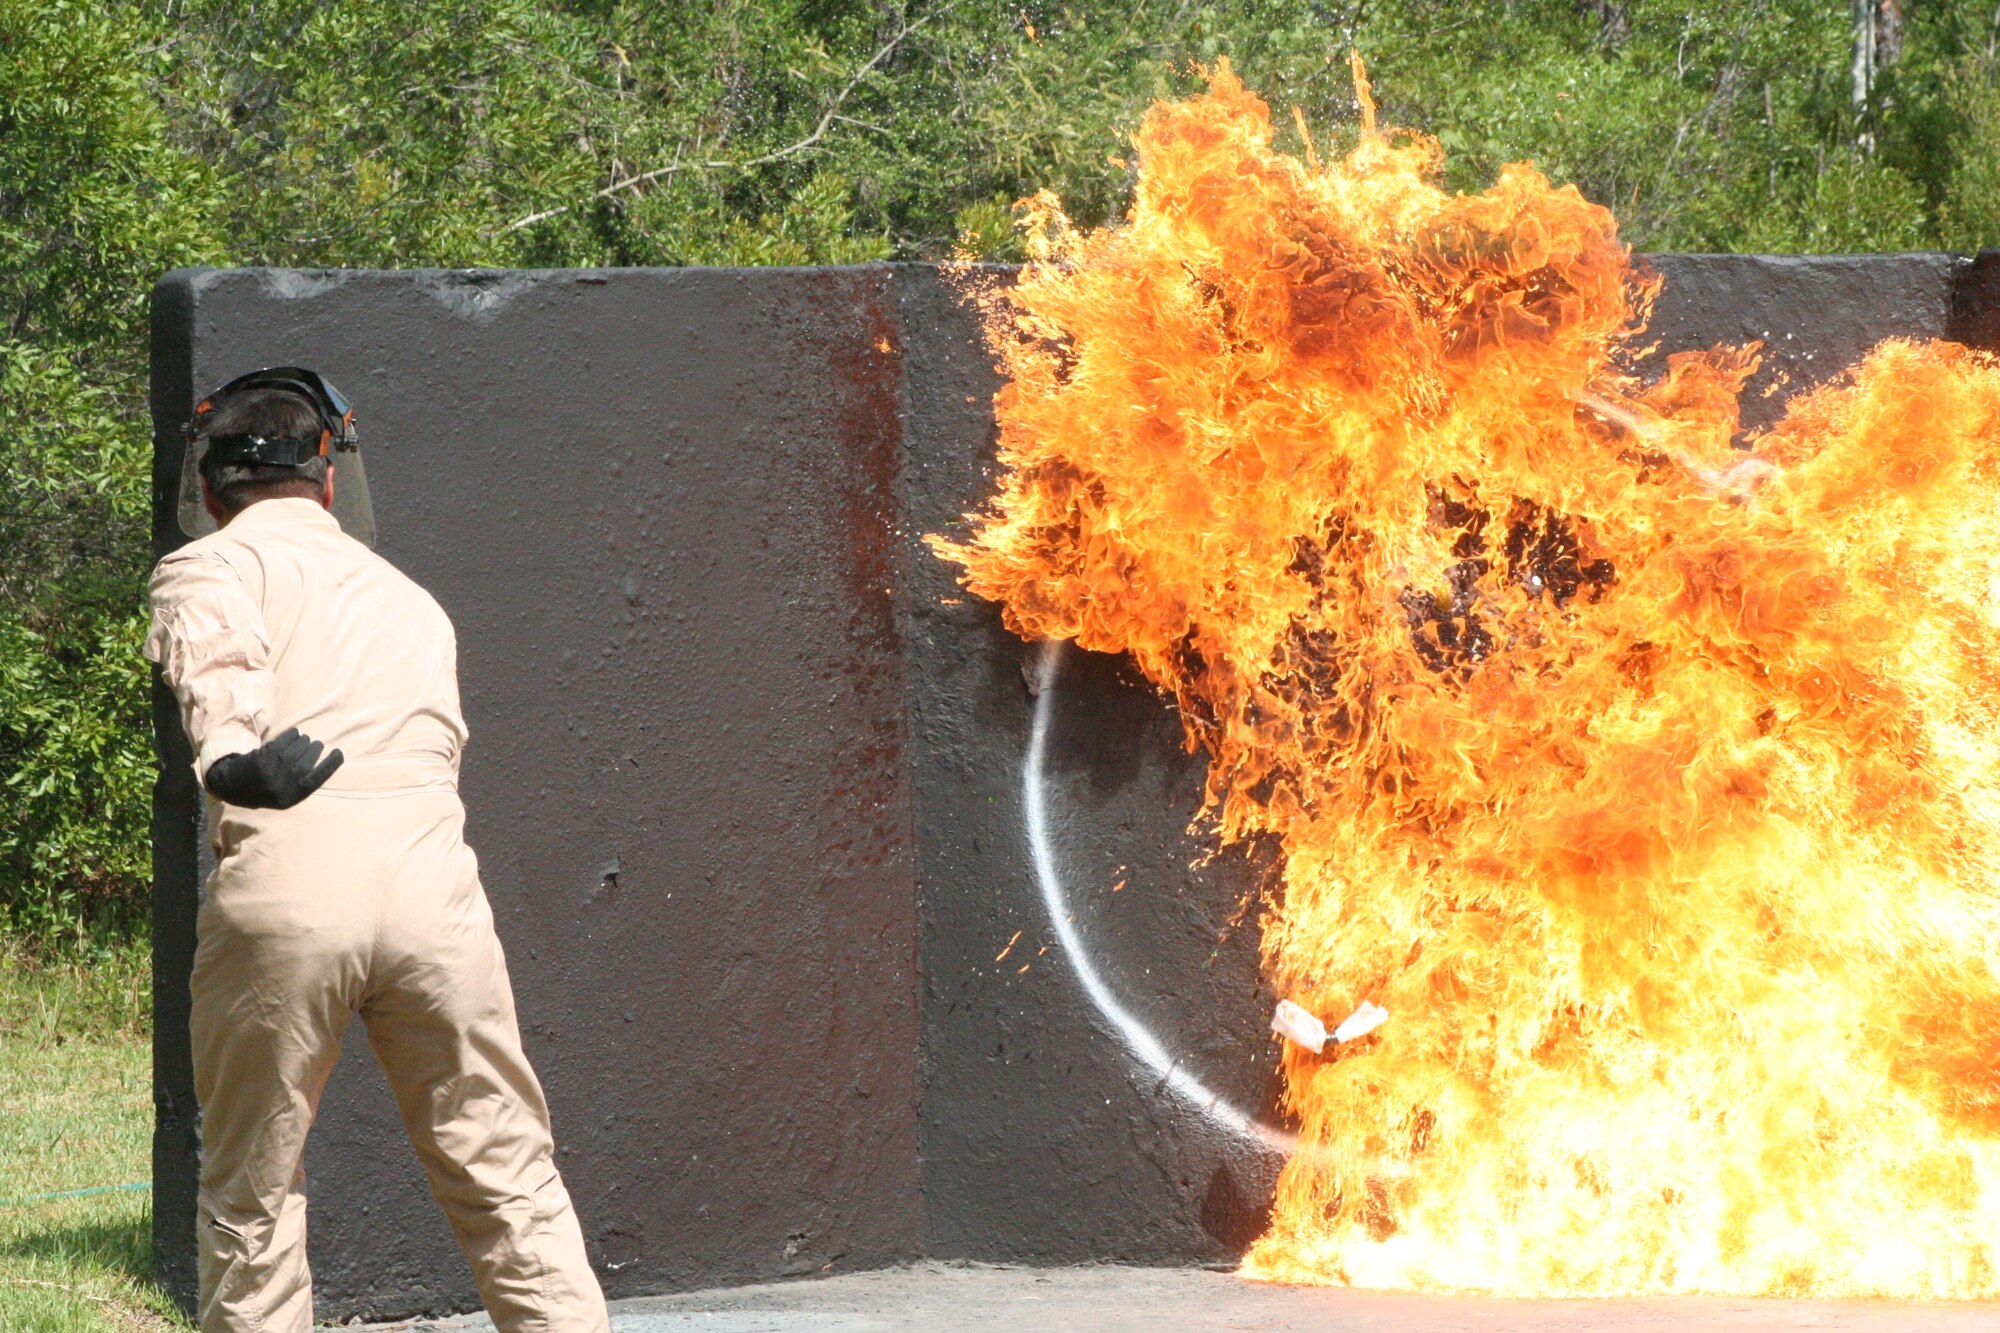 An instructor from the Dynamics International of Terrorism course demonstrates the destructive capabilities of a Molotov cocktail at Hurlburt Field July 12. (U.S. Air Force Photograph by Staff Sgt. Mareshah Haynes)